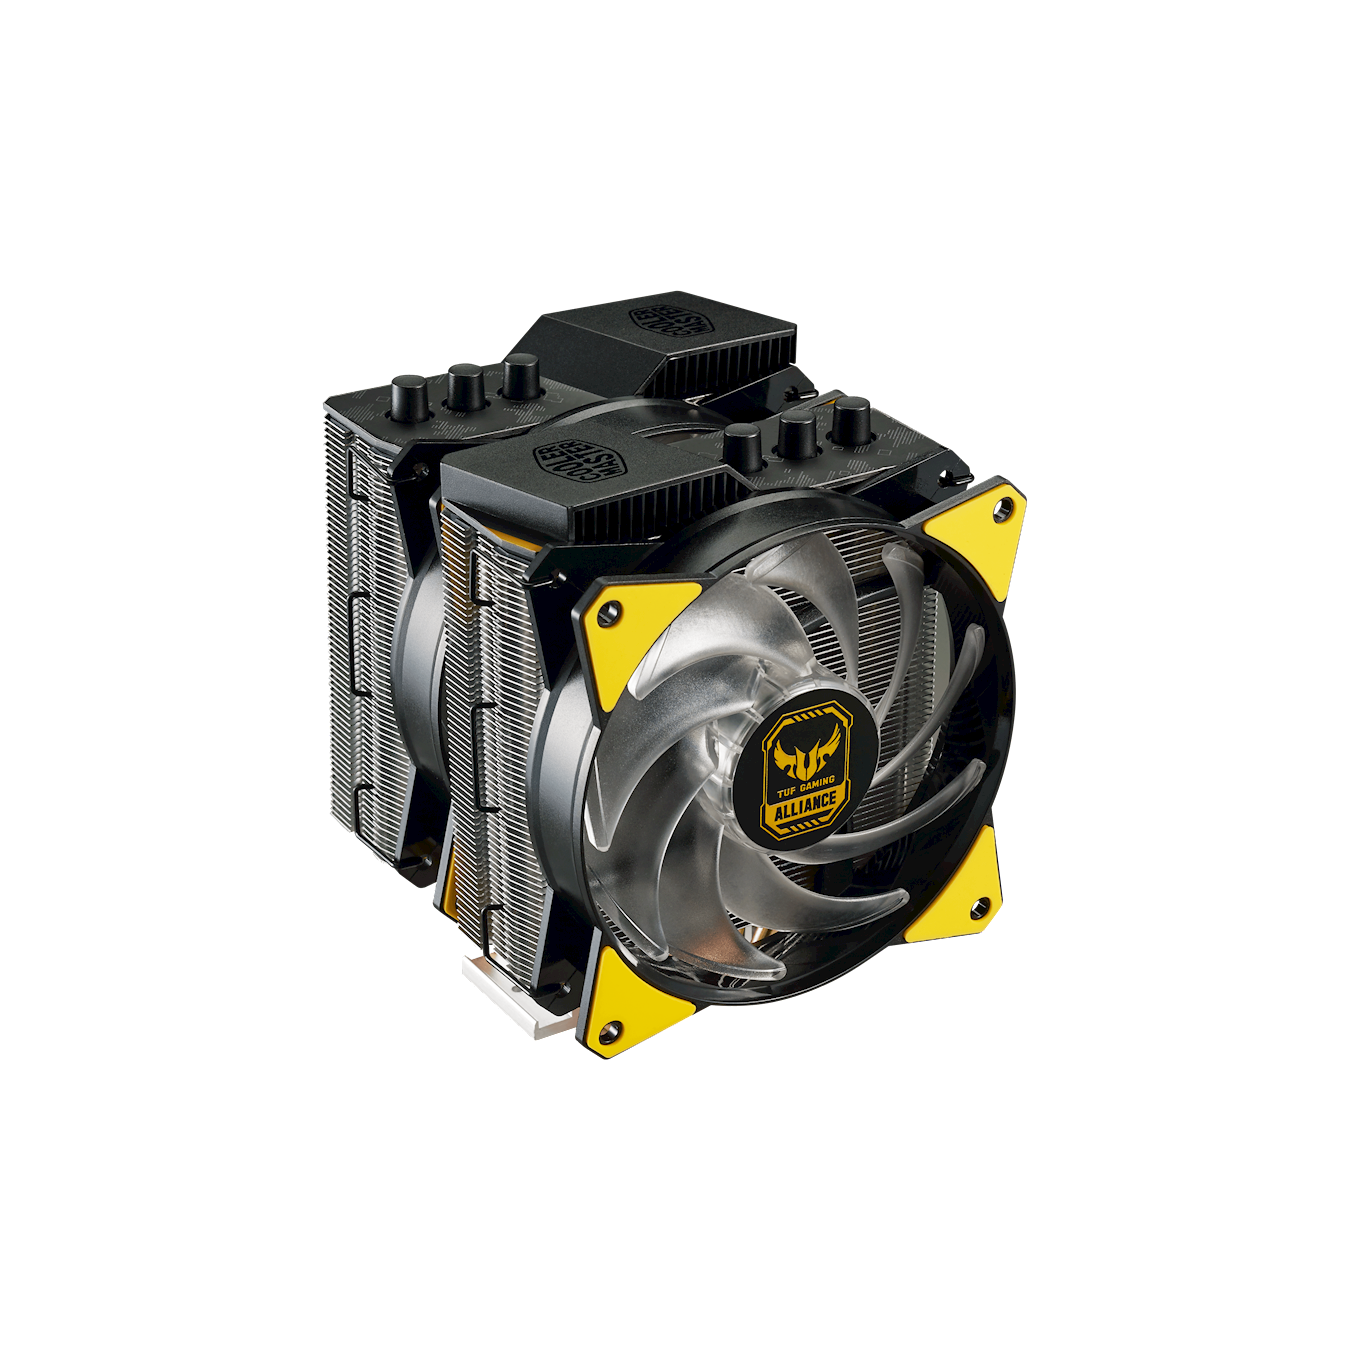 MasterAir MA620P TUF - Based on the highly regarded Hyper 212 heatsink design with double the heat dissipation power.